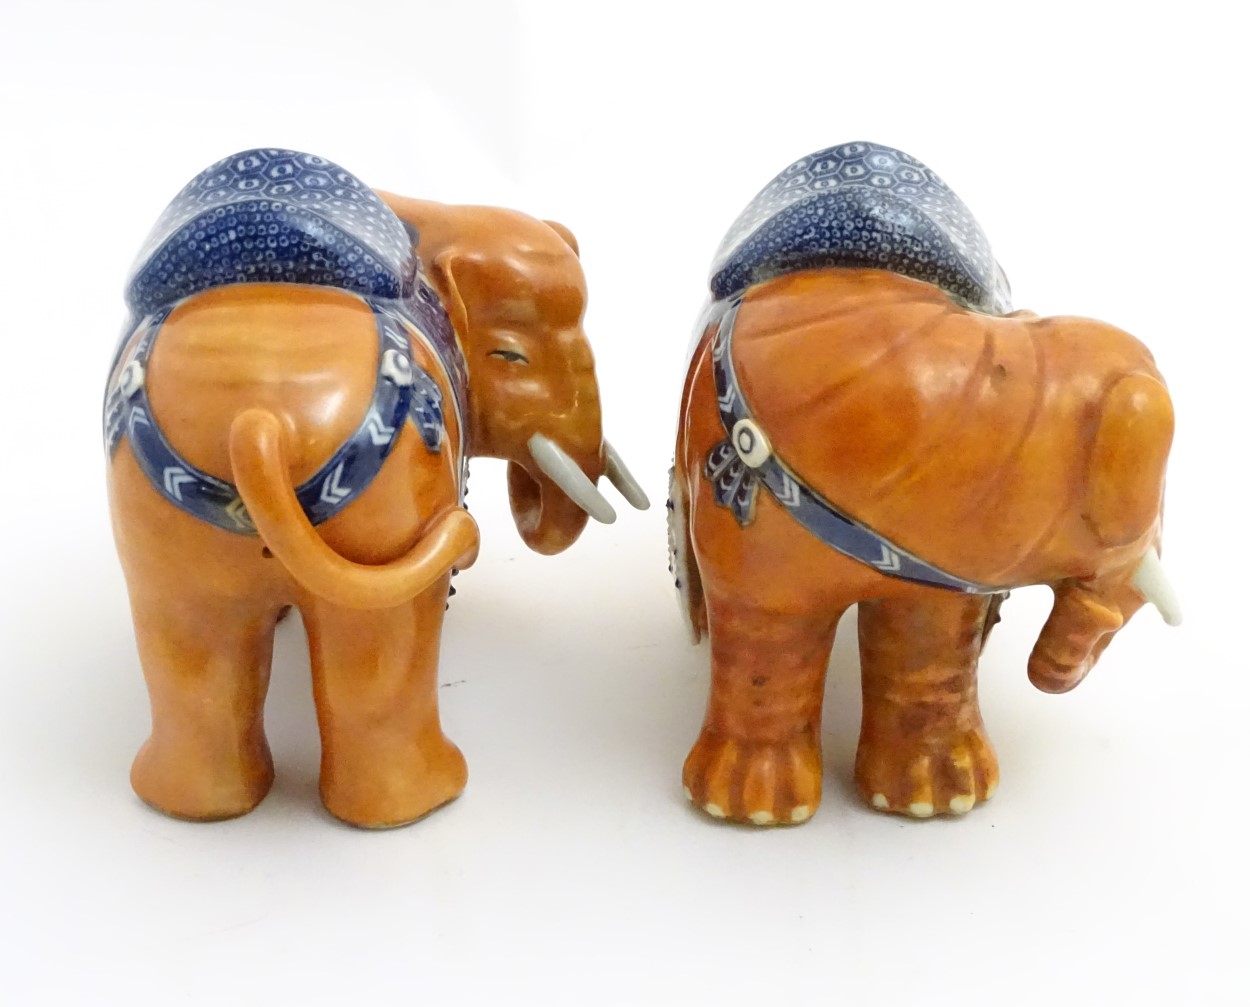 A pair of Chinese ceramic elephants with rust coloured bodies and blue and white patterned saddles. - Image 5 of 7